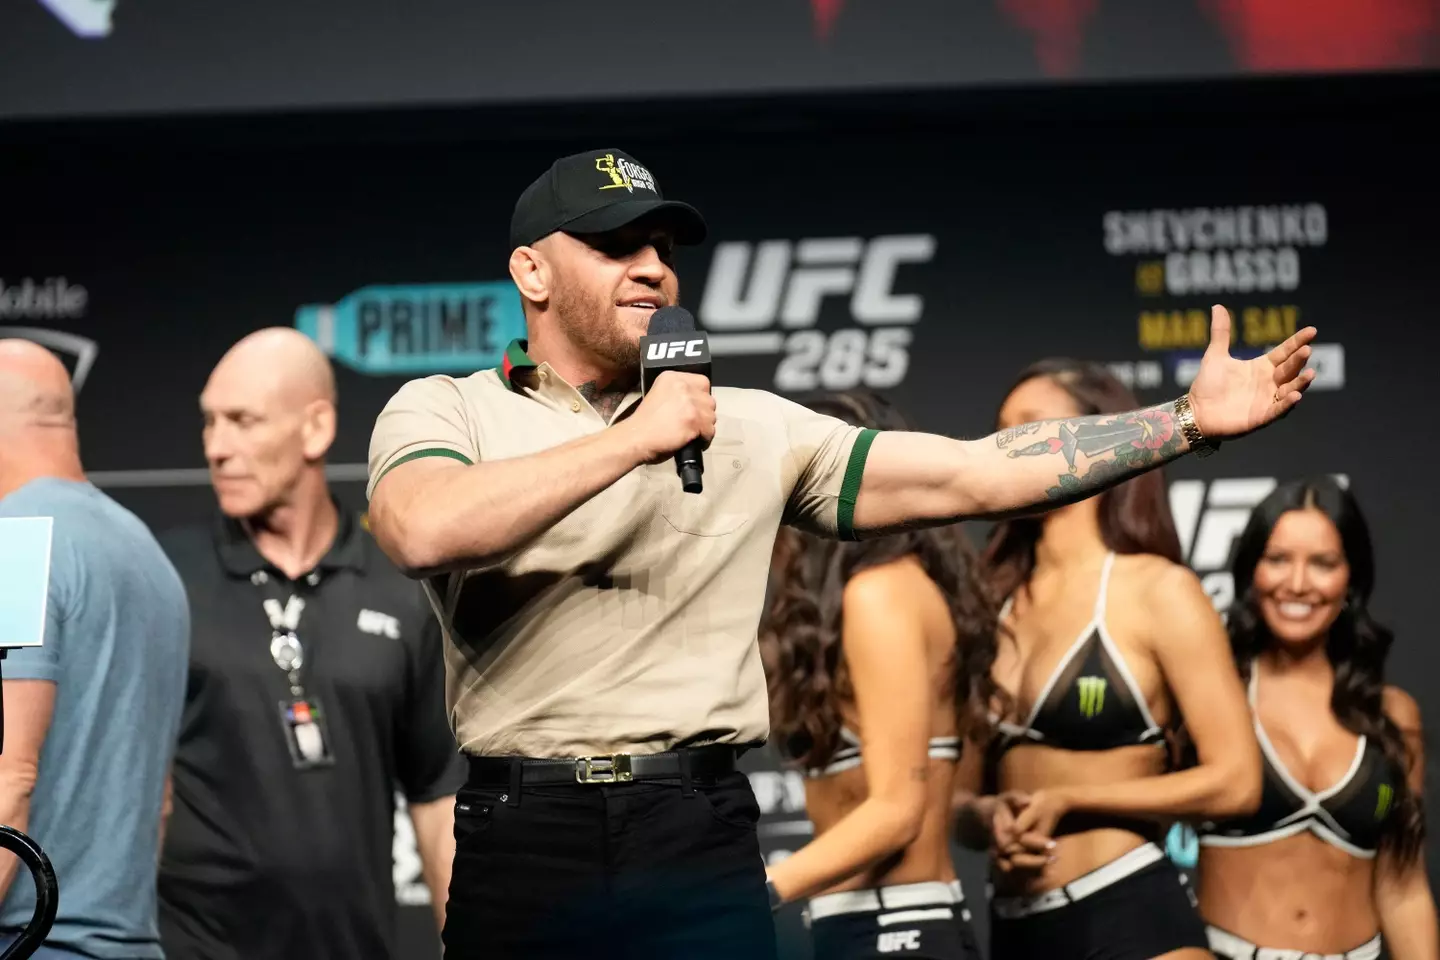 McGregor gatecrashed the weigh-in with some very exciting news.